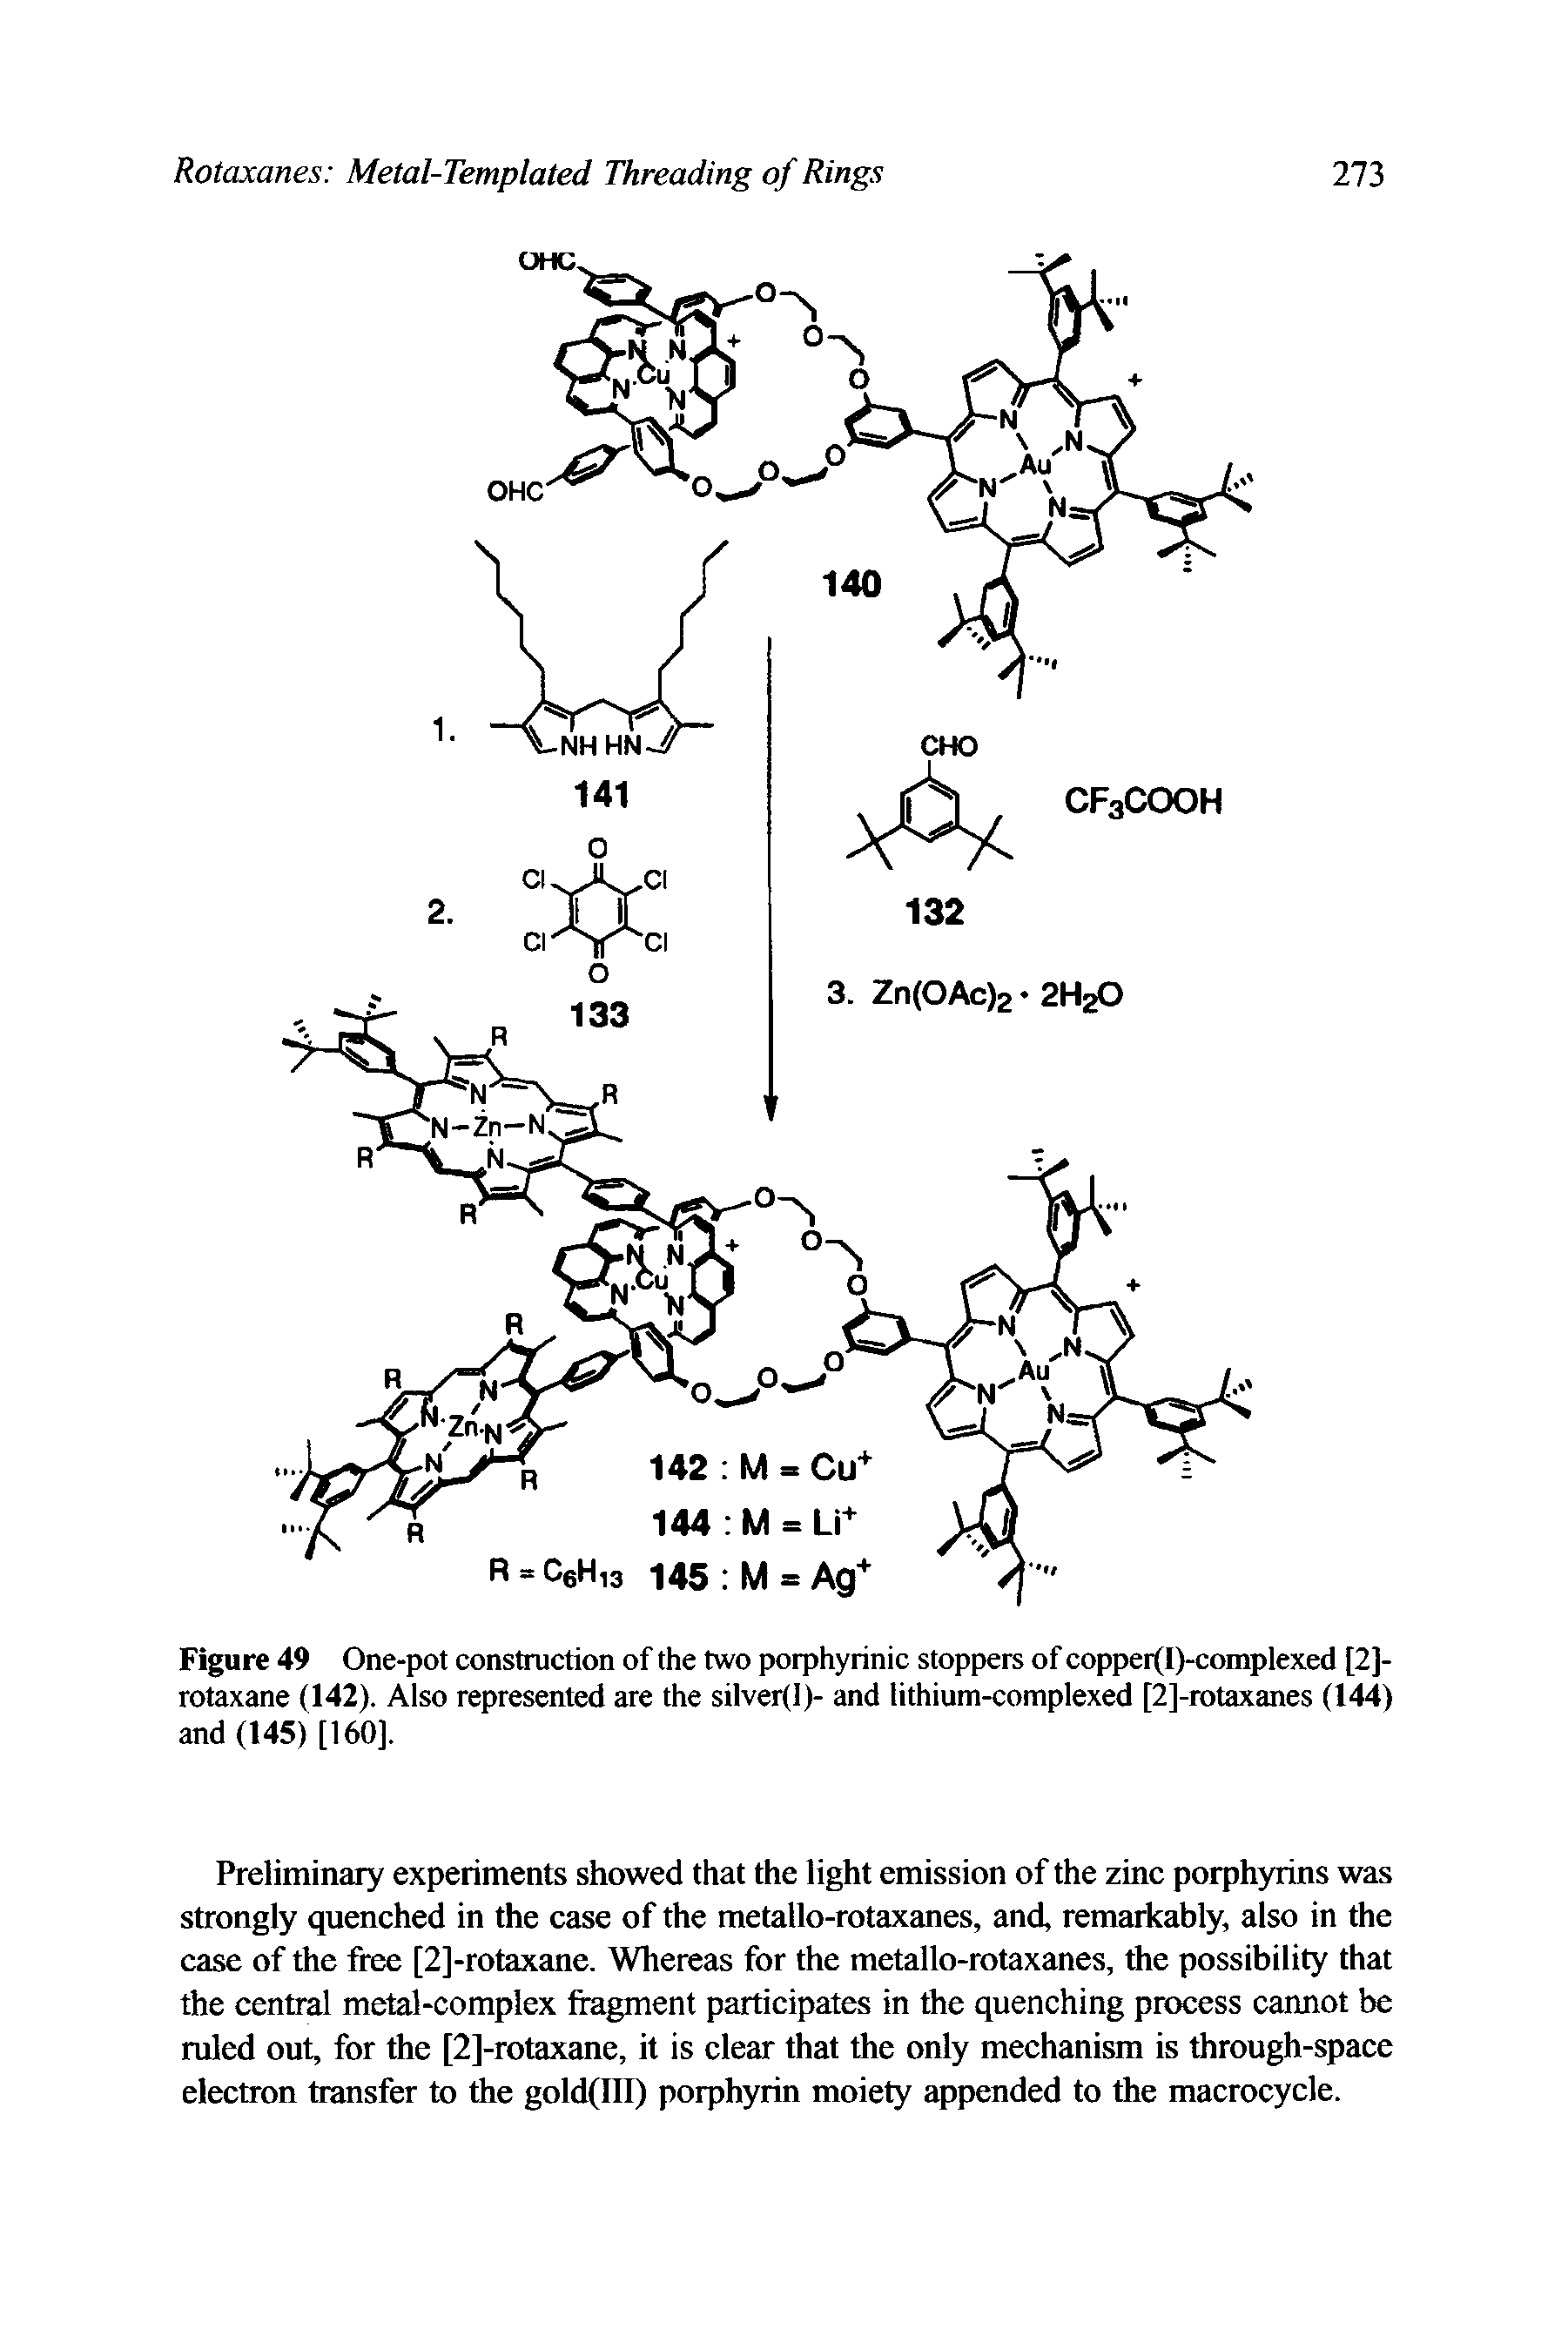 Figure 49 One-pot construction of the two porphyrinic stoppers of copper(I)-complexed [2]-rotaxane (142). Also represented are the silver(l)- and lithium-complexed [2]-rotaxanes (144) and (145) [160].